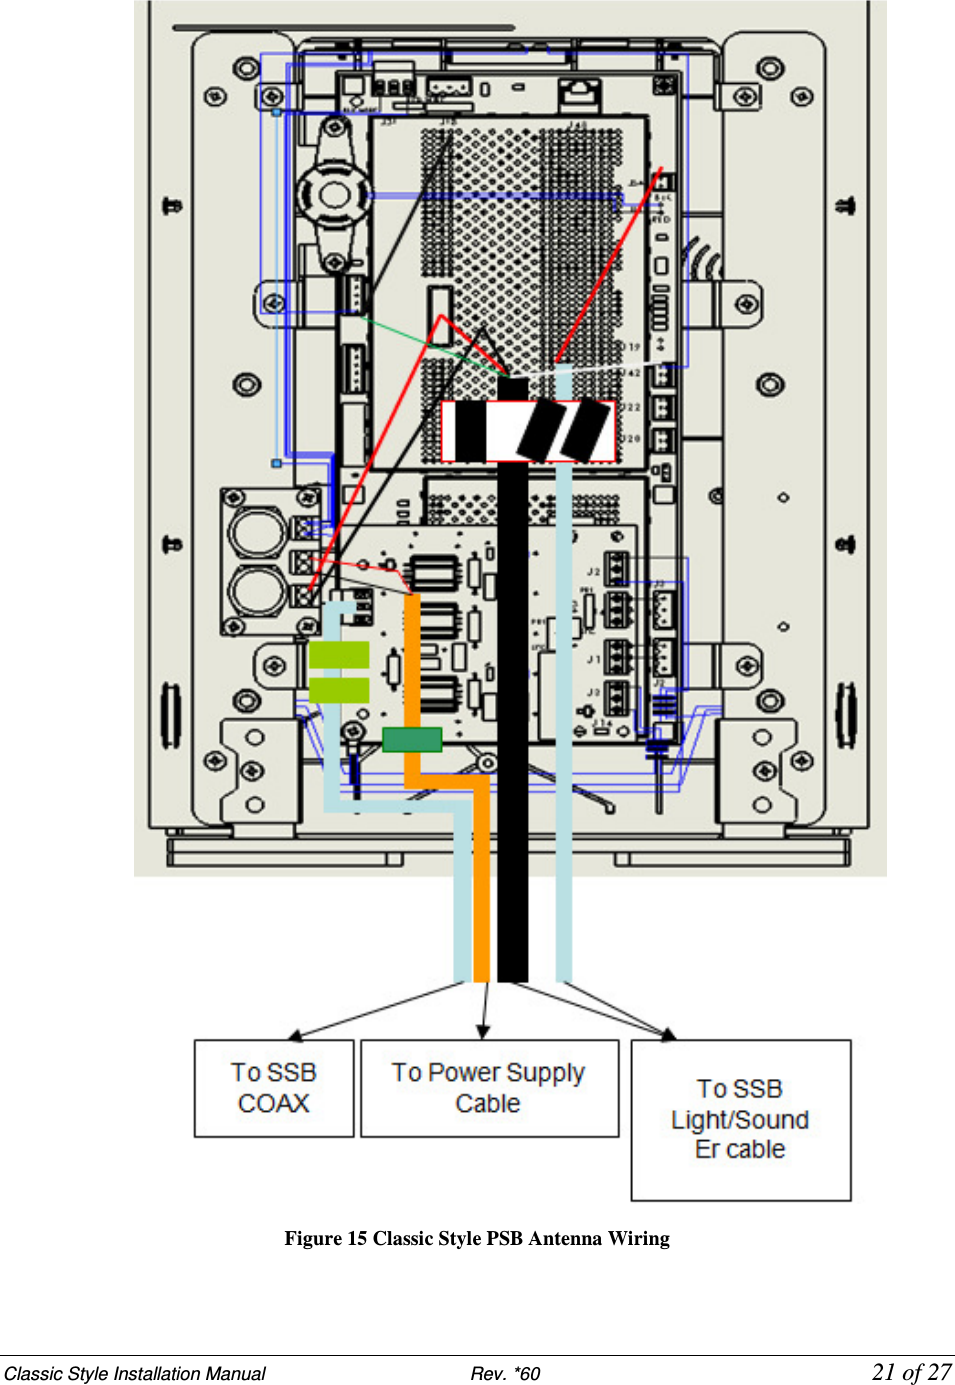 Classic Style Installation Manual                           Rev. *60           21 of 27   Figure 15 Classic Style PSB Antenna Wiring 